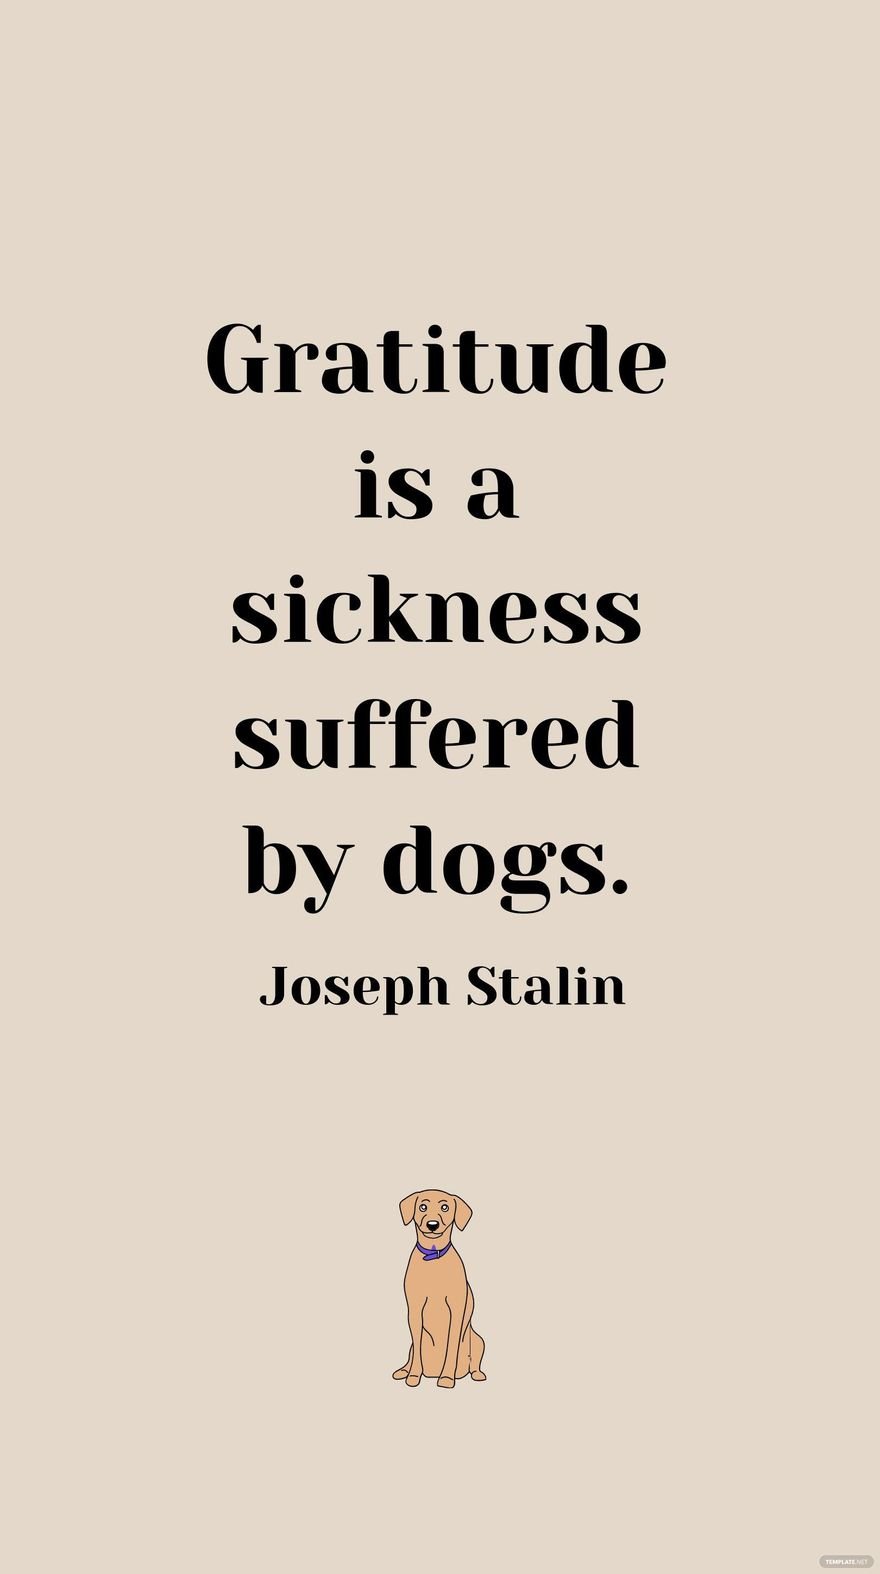 Free Joseph Stalin - Gratitude is a sickness suffered by dogs. in JPG